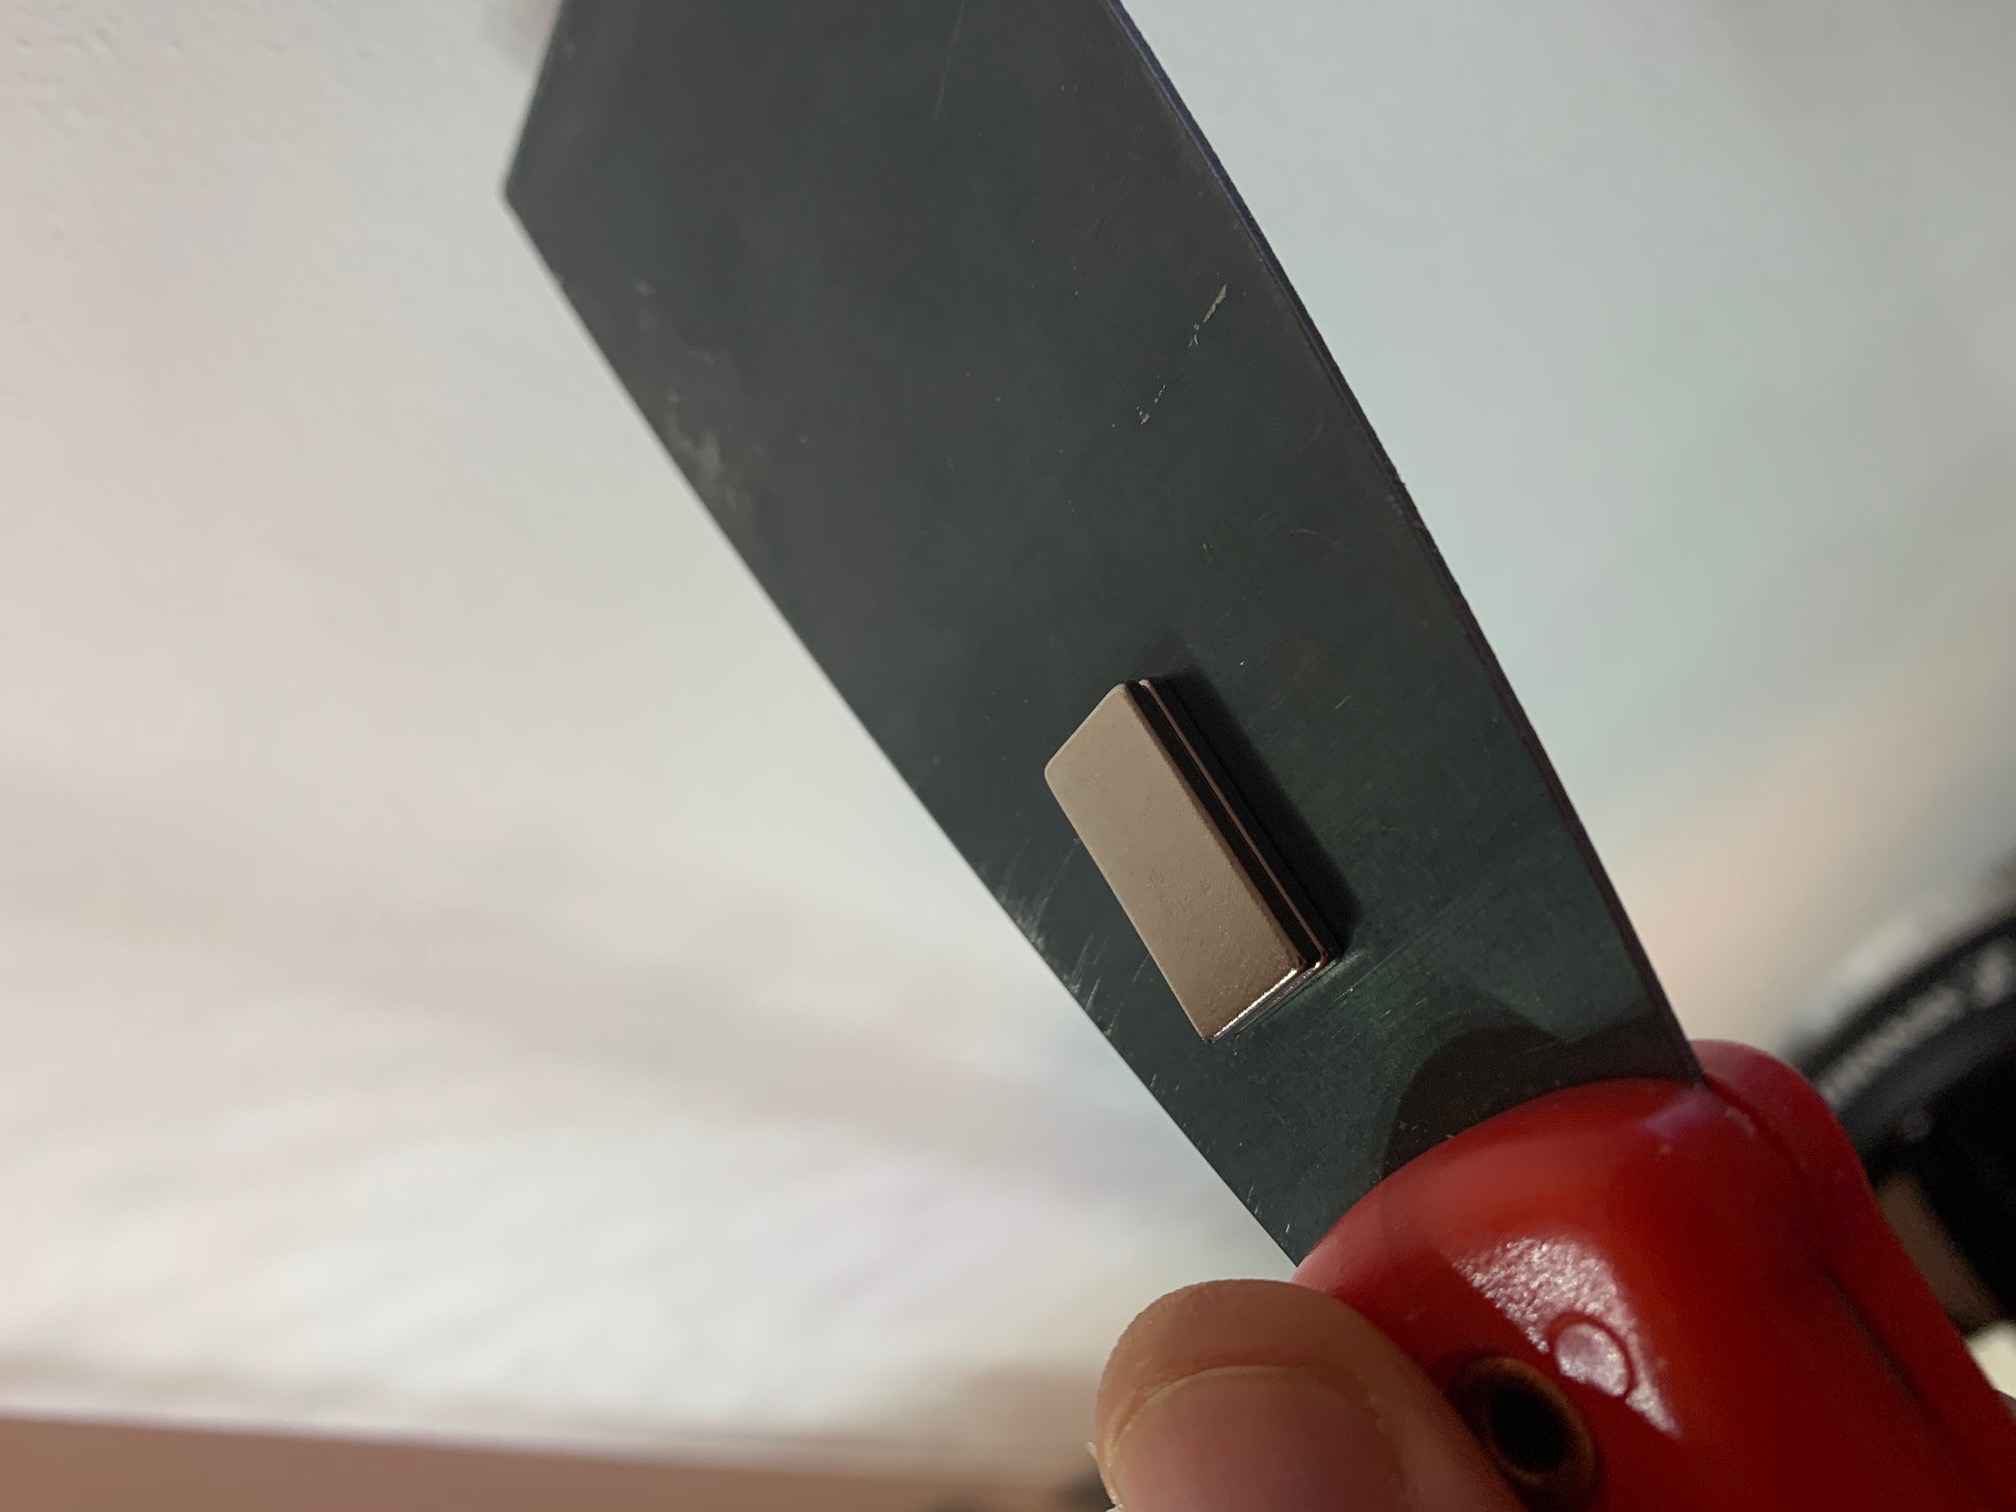 [Hack] 3D Printer Spatula Tool "Holder" with a magnet (No printing needed)